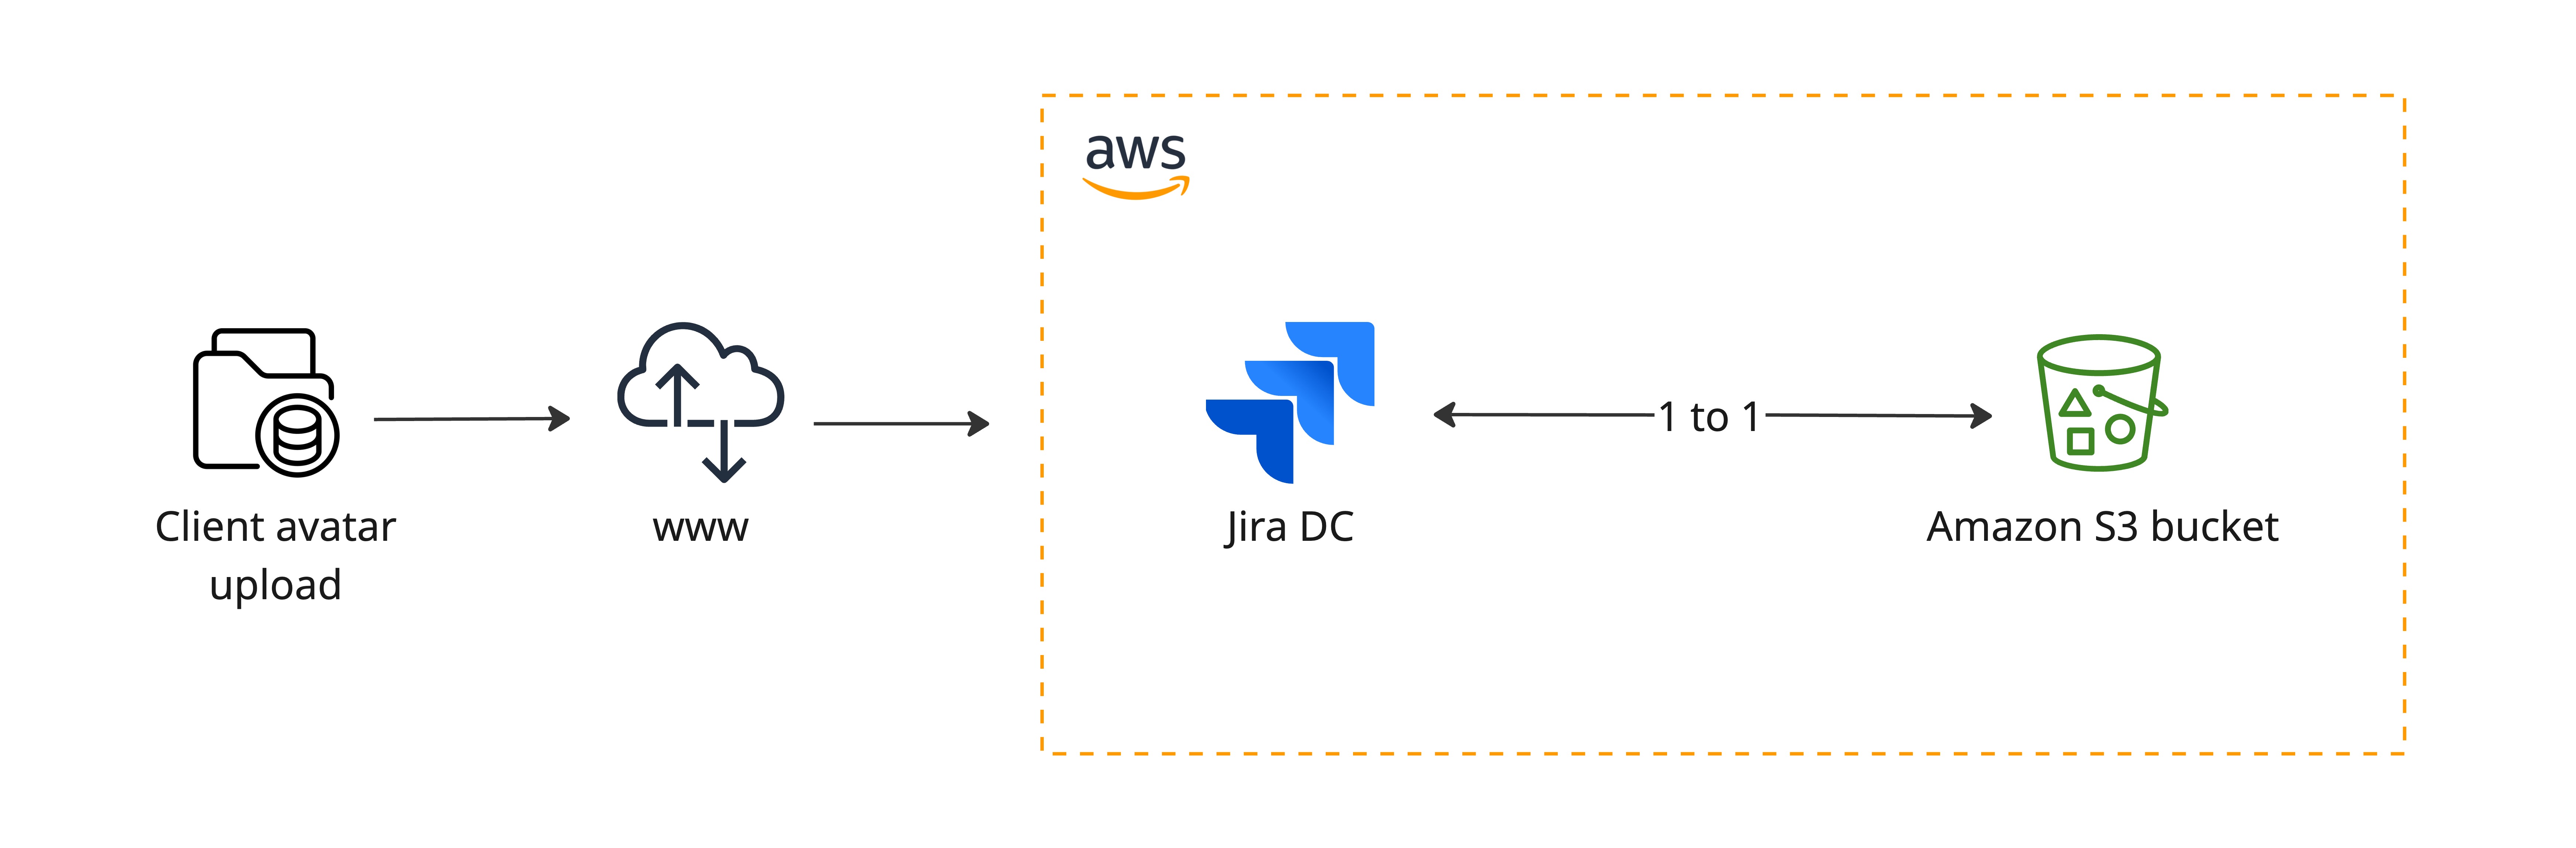 Diagram of how S3 object storage works. Avatars uploaded to Jira are stored in and retrieved from an Amazon S3 bucket